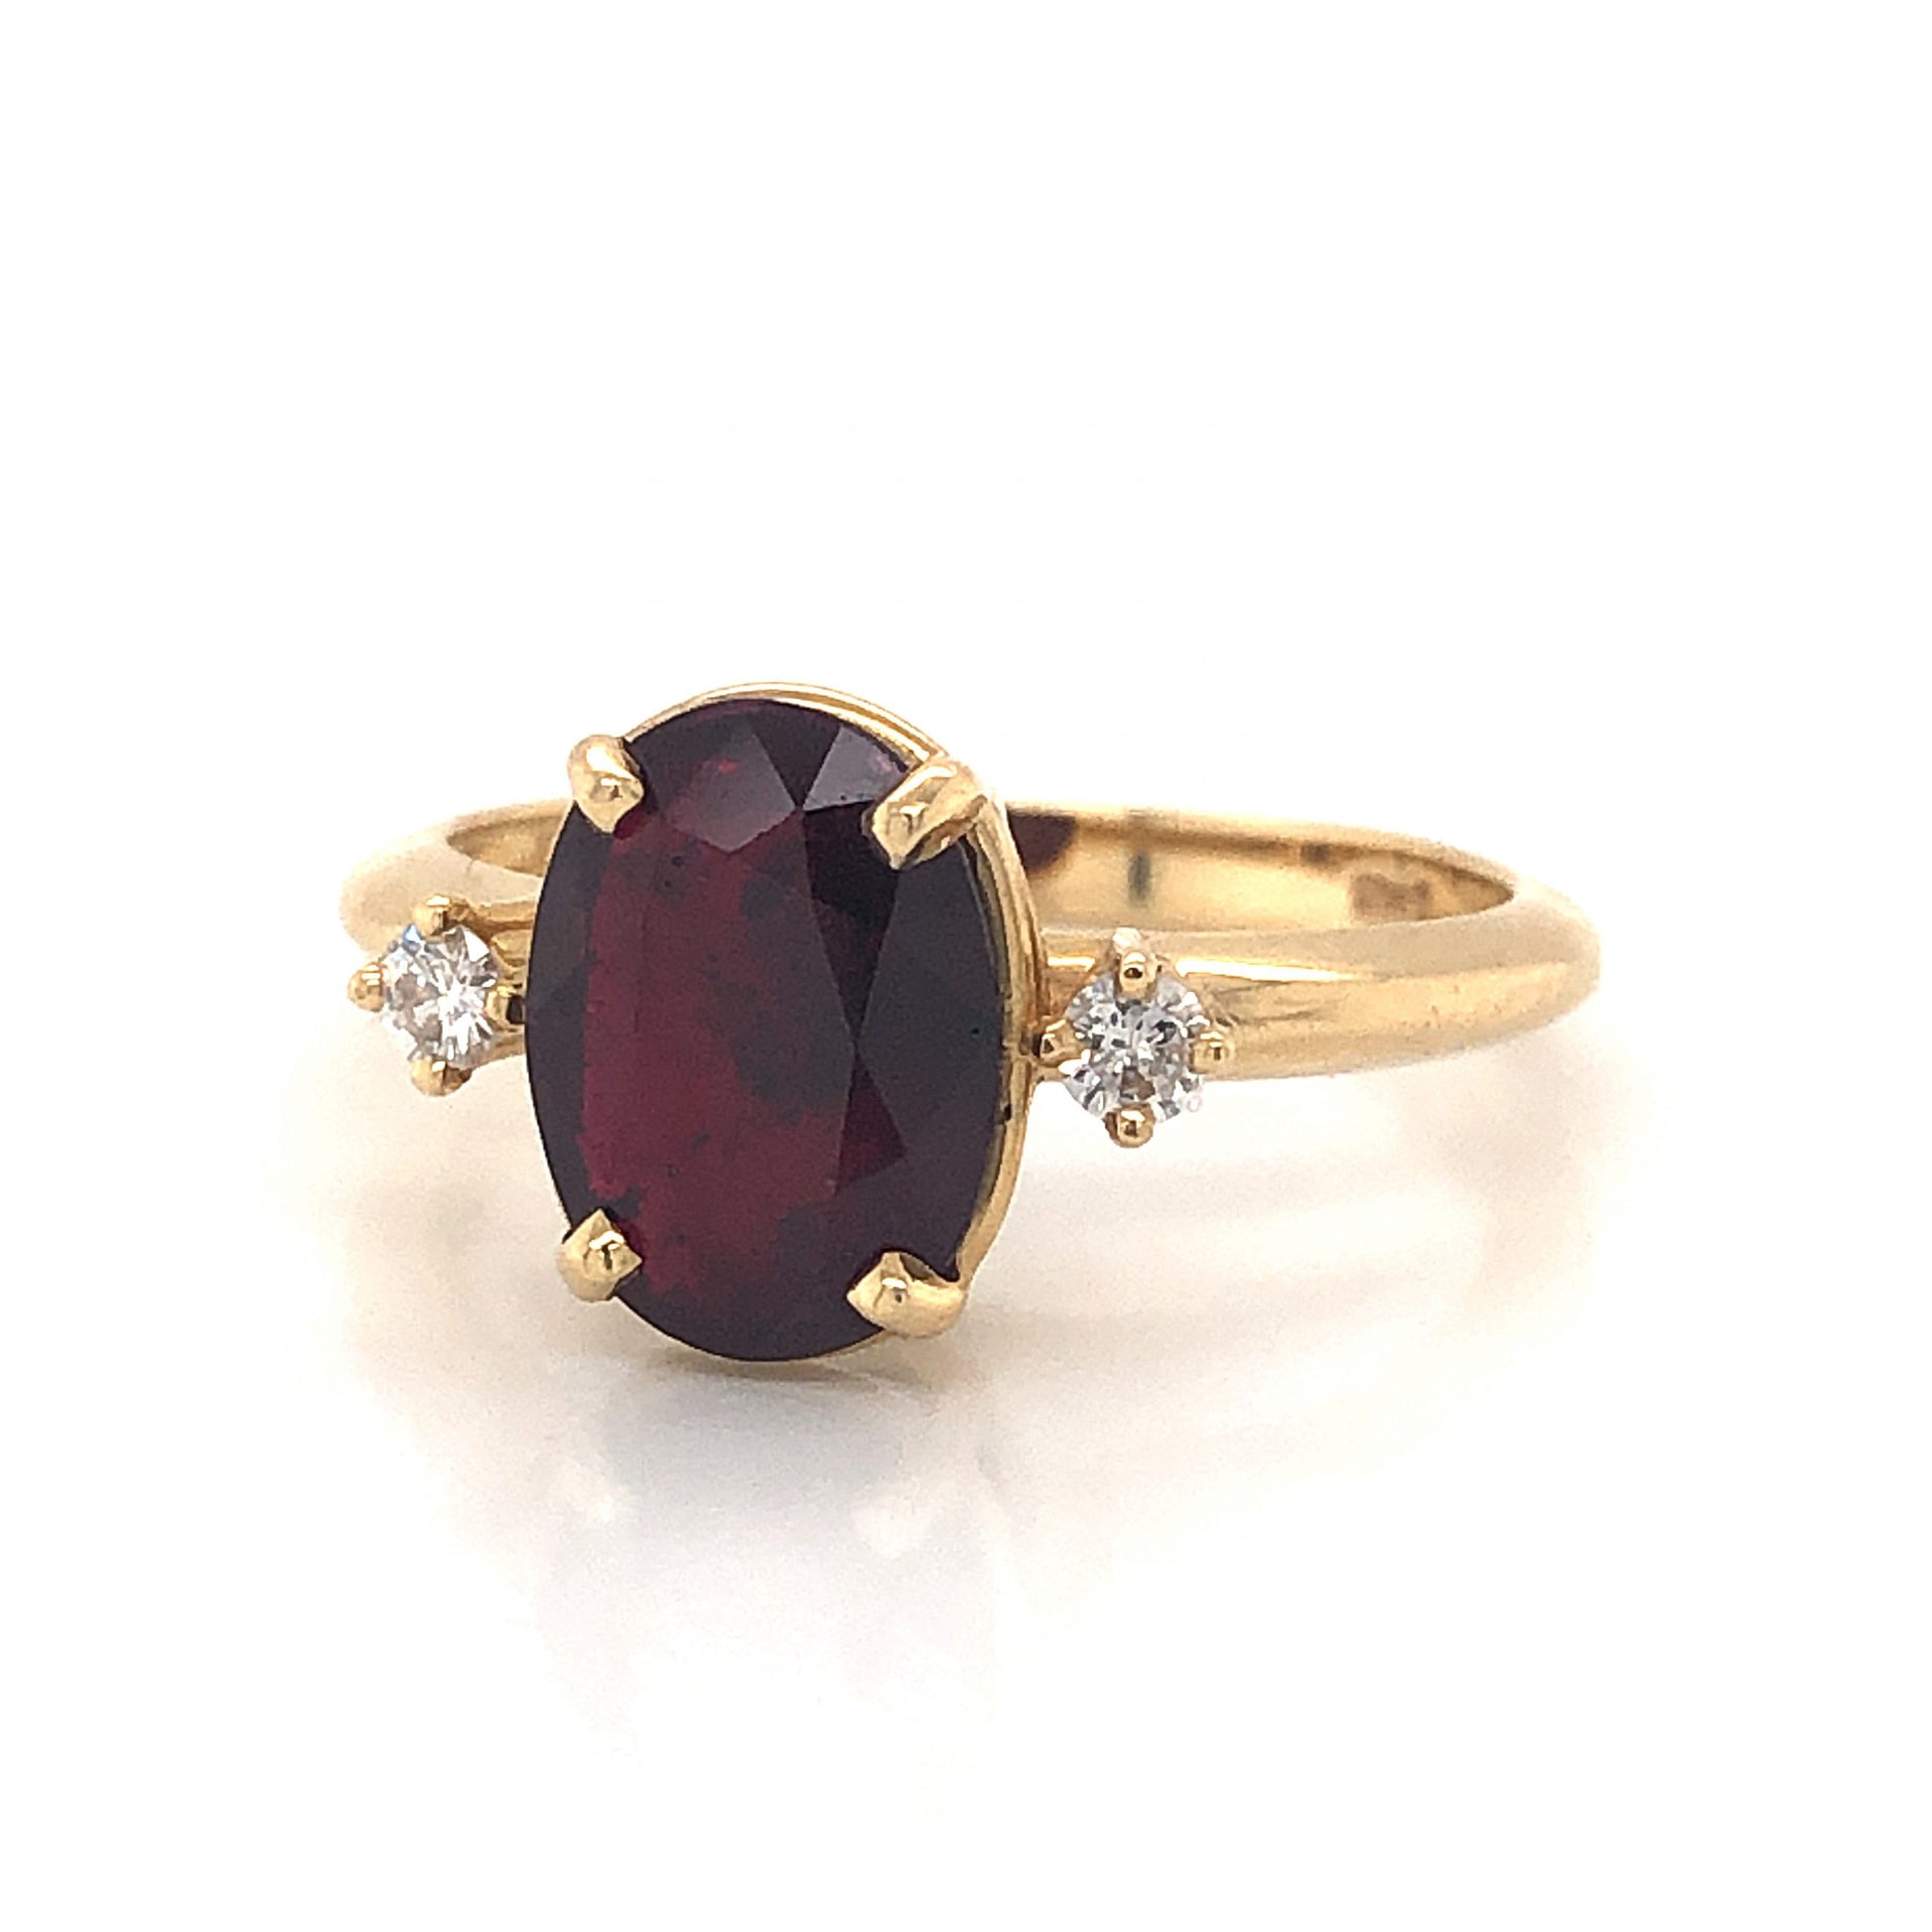 Oval Cut Ruby Engagement Ring in 14k Yellow GoldComposition: 14 Karat Yellow Gold Ring Size: 6.5 Total Diamond Weight: .10ct Total Gram Weight: 2.7 g Inscription: 14k
      